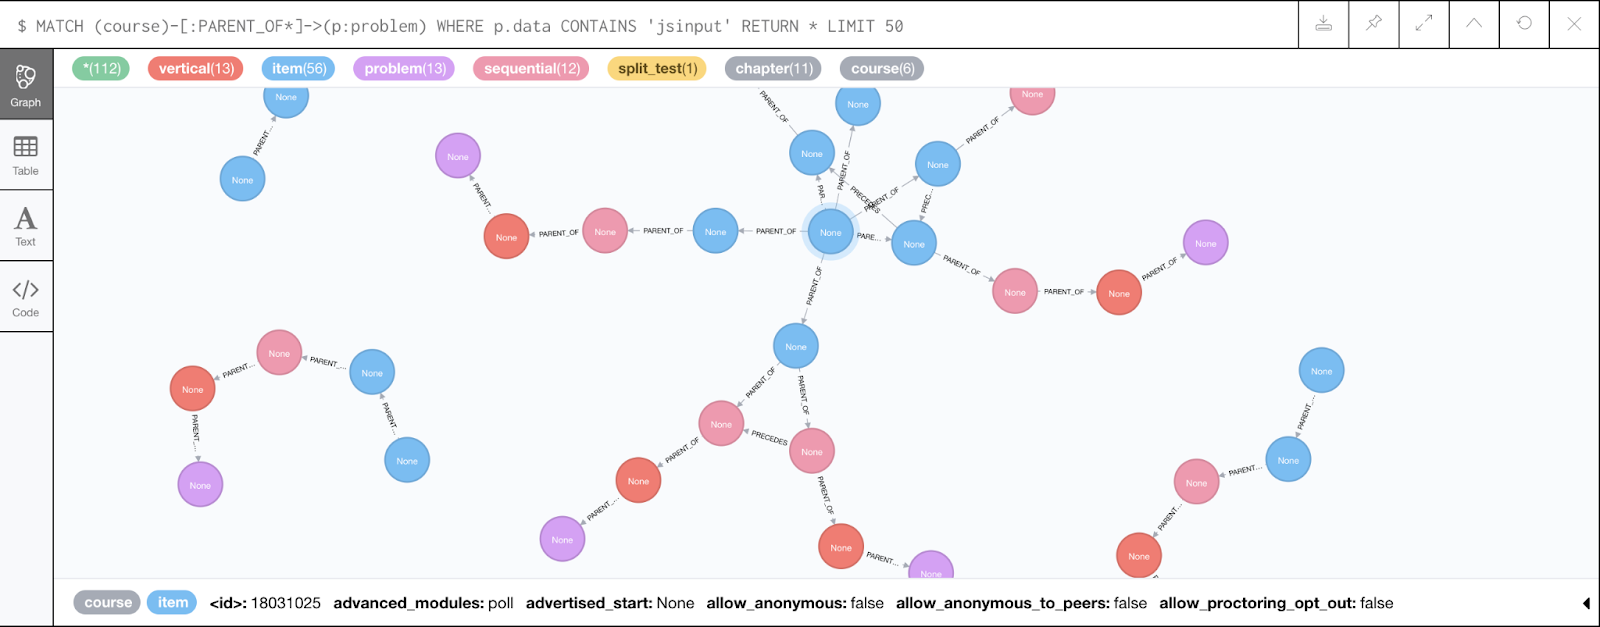 The Neo4j Web interface can be used to visualize relationships between blocks in a course. Here, the query "MATCH (course)-[:PARENT_OF*]->(p:problem) WHERE p.data CONTAINS 'jsinput' RETURN * LIMIT 50" is used to visualize problem blocks that use custom JavaScript, along with their ancestry.